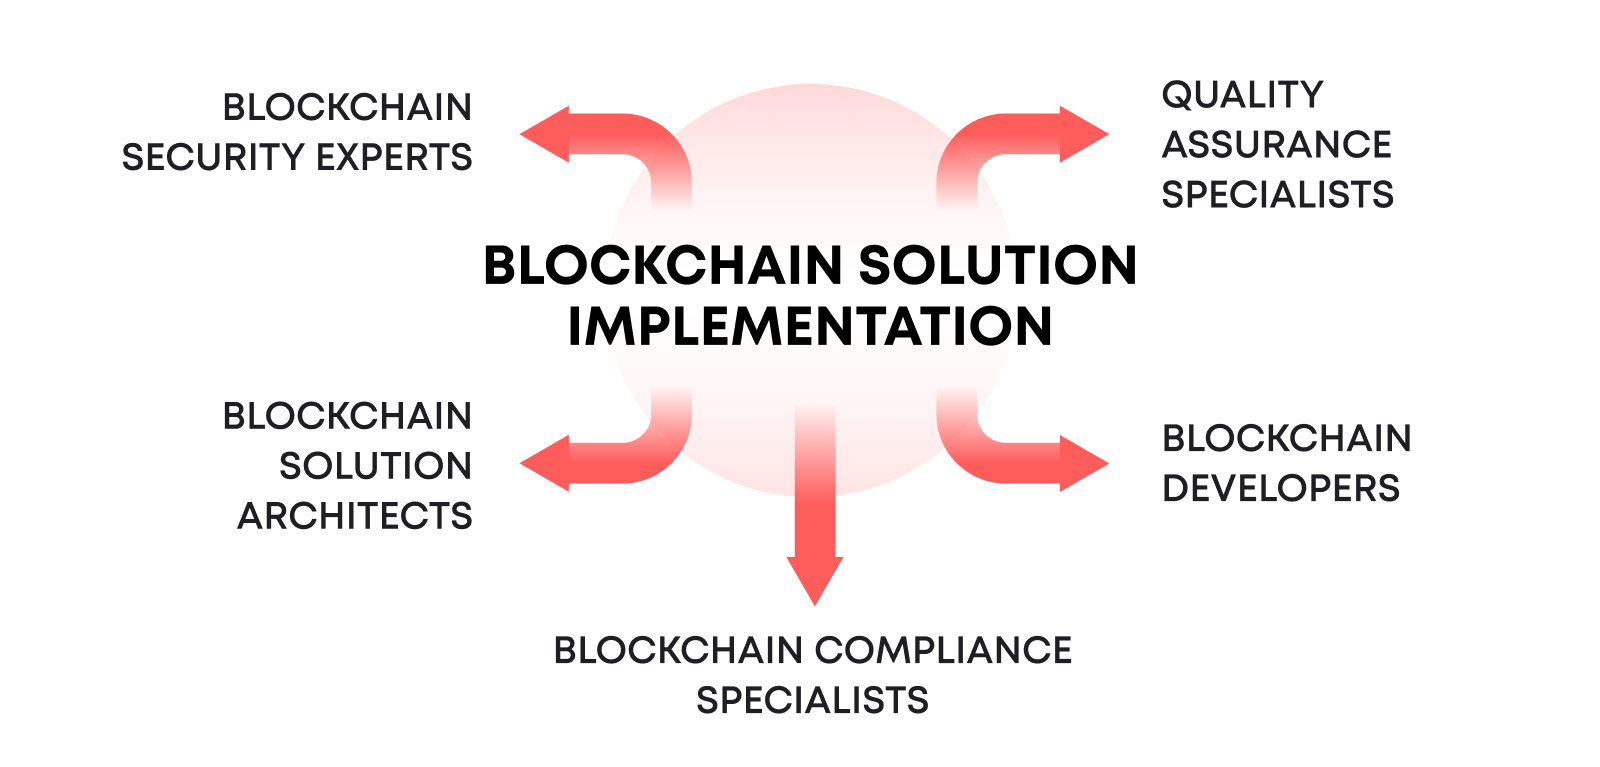 For enterprises looking to implement blockchain technology, particularly those concerned with its security and performance, the need for specialized roles and expertise is paramount